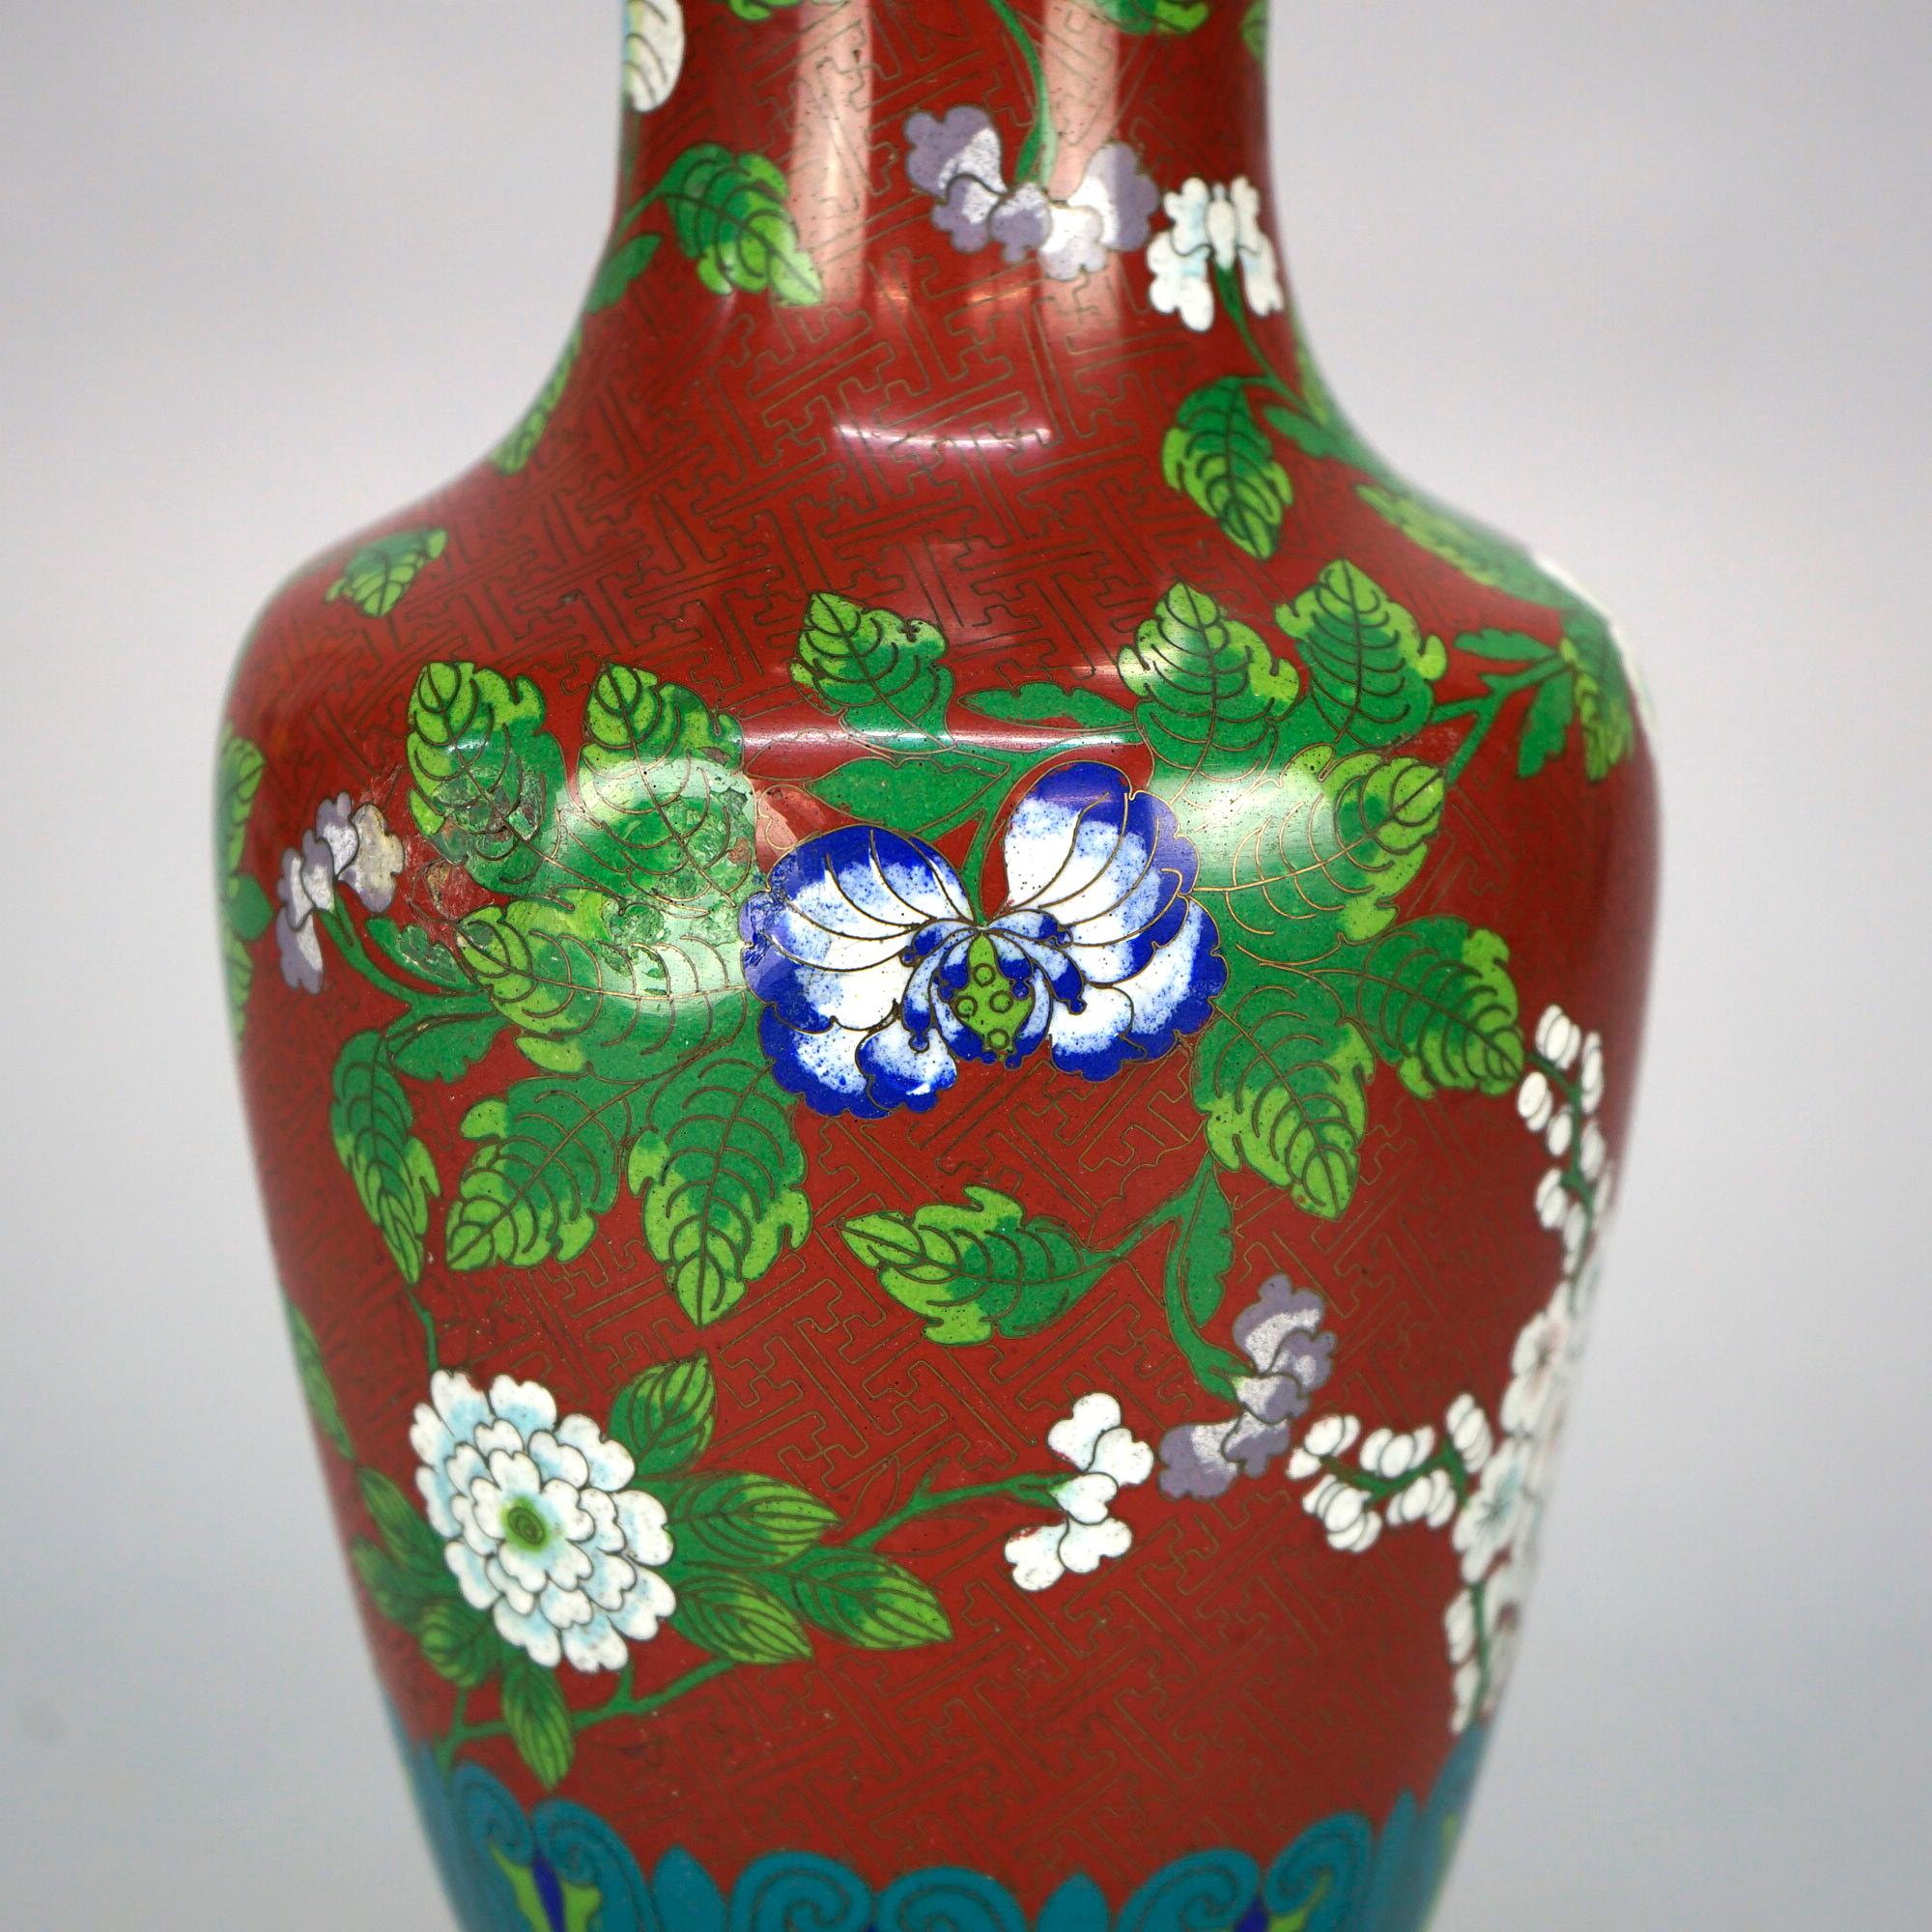 Antique Chinese Cloissone Enameled Vase with Bronze Base, Garden Themed, c1900 For Sale 2